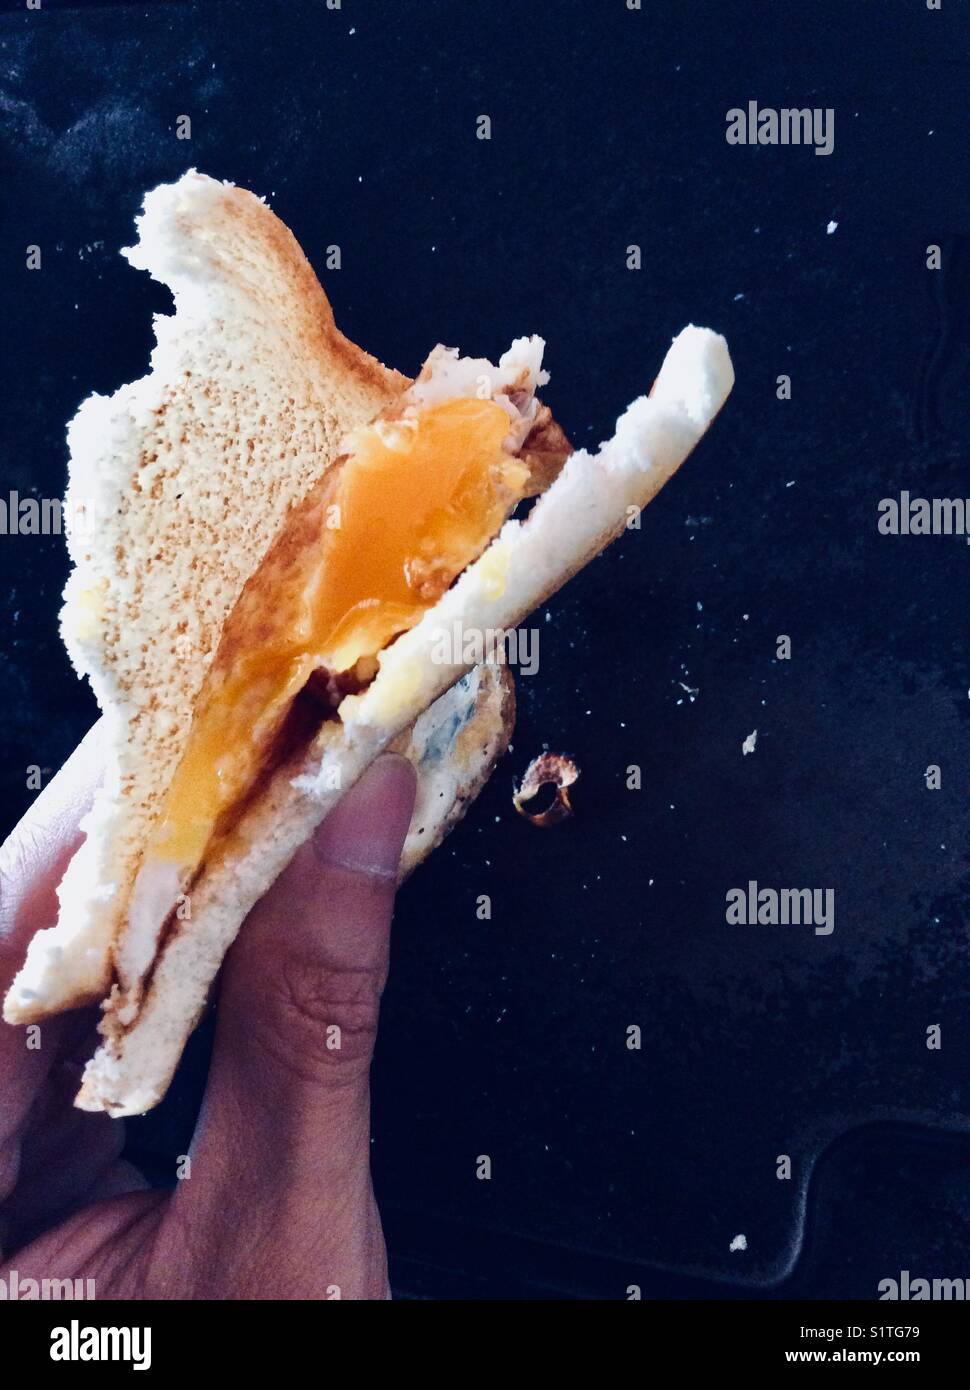 Half fried egg yolk and bitten toasted bread sandwich on black background Stock Photo